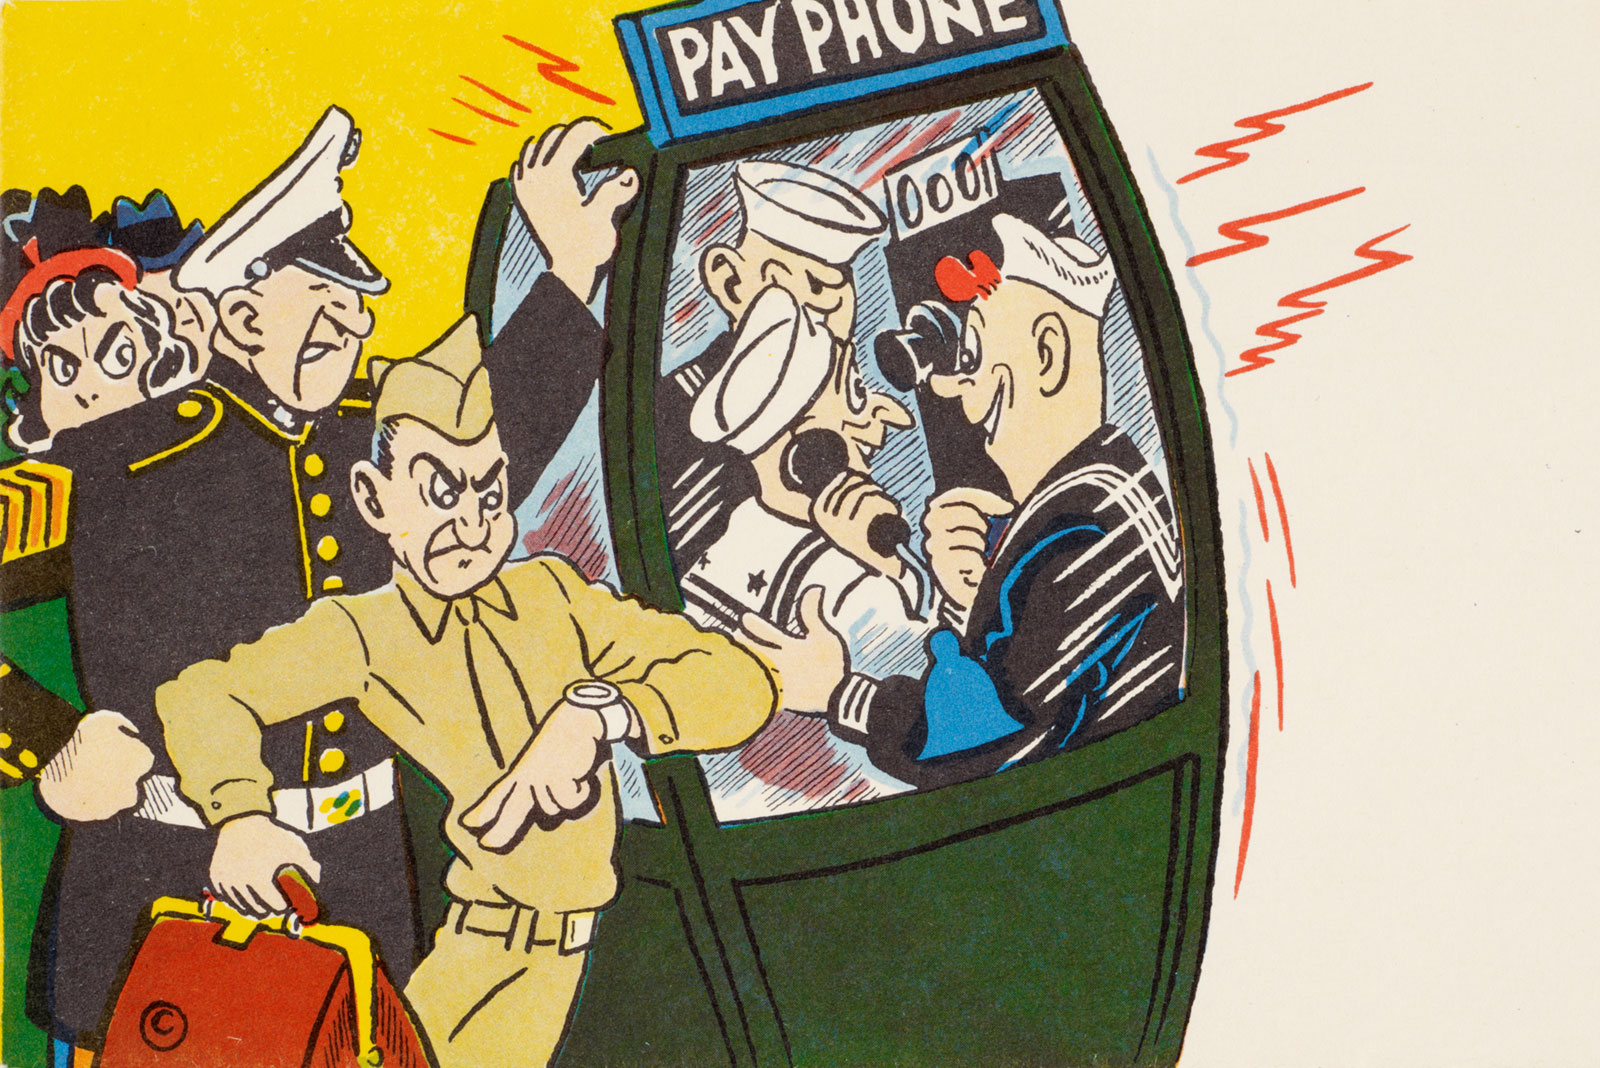 Envelope showing people fighting over a payphone